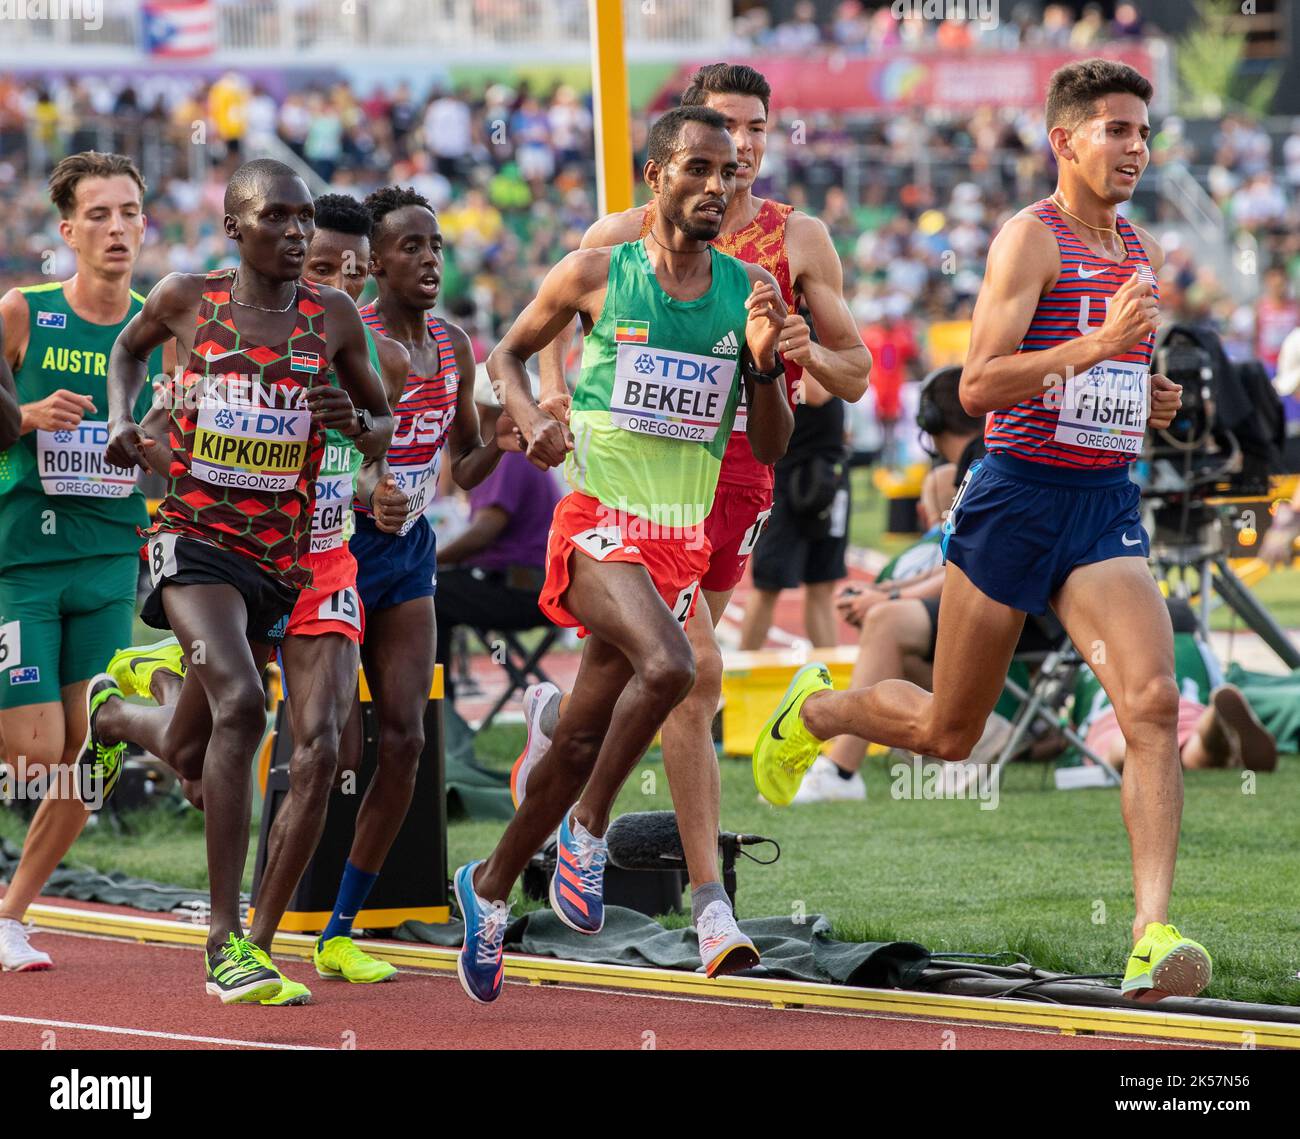 Grant Fisher of the USA competing in the men’s 5000m heats at the World Athletics Championships, Hayward Field, Eugene, Oregon USA on the 21st July 20 Stock Photo